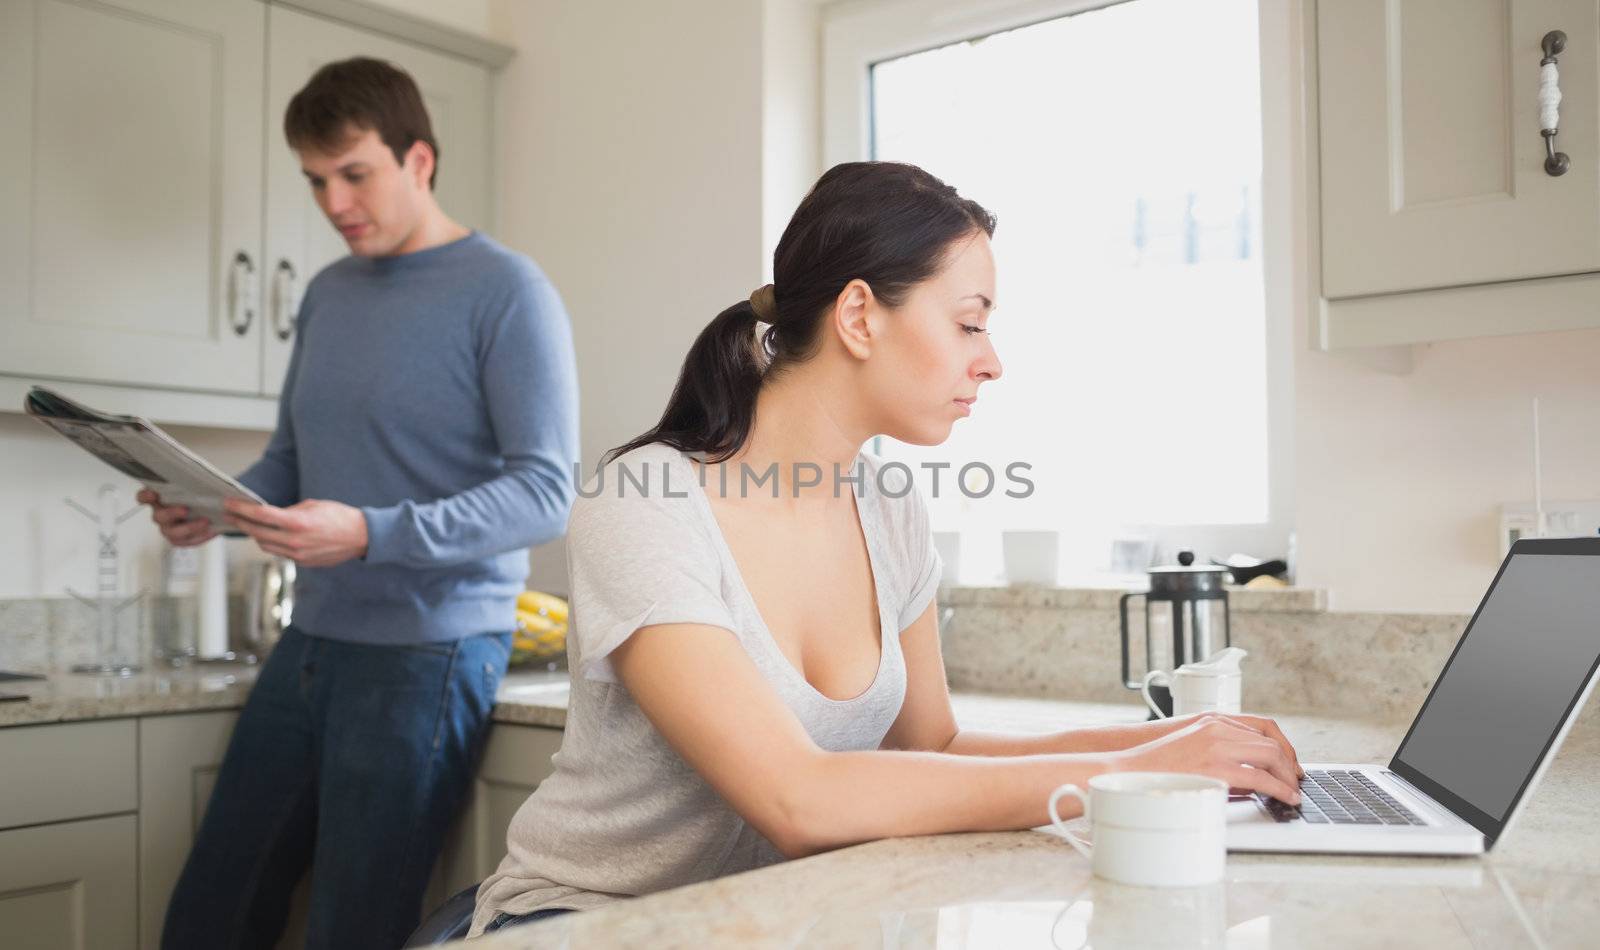 Two people in the kitchen who are using the laptop and reading a magazine